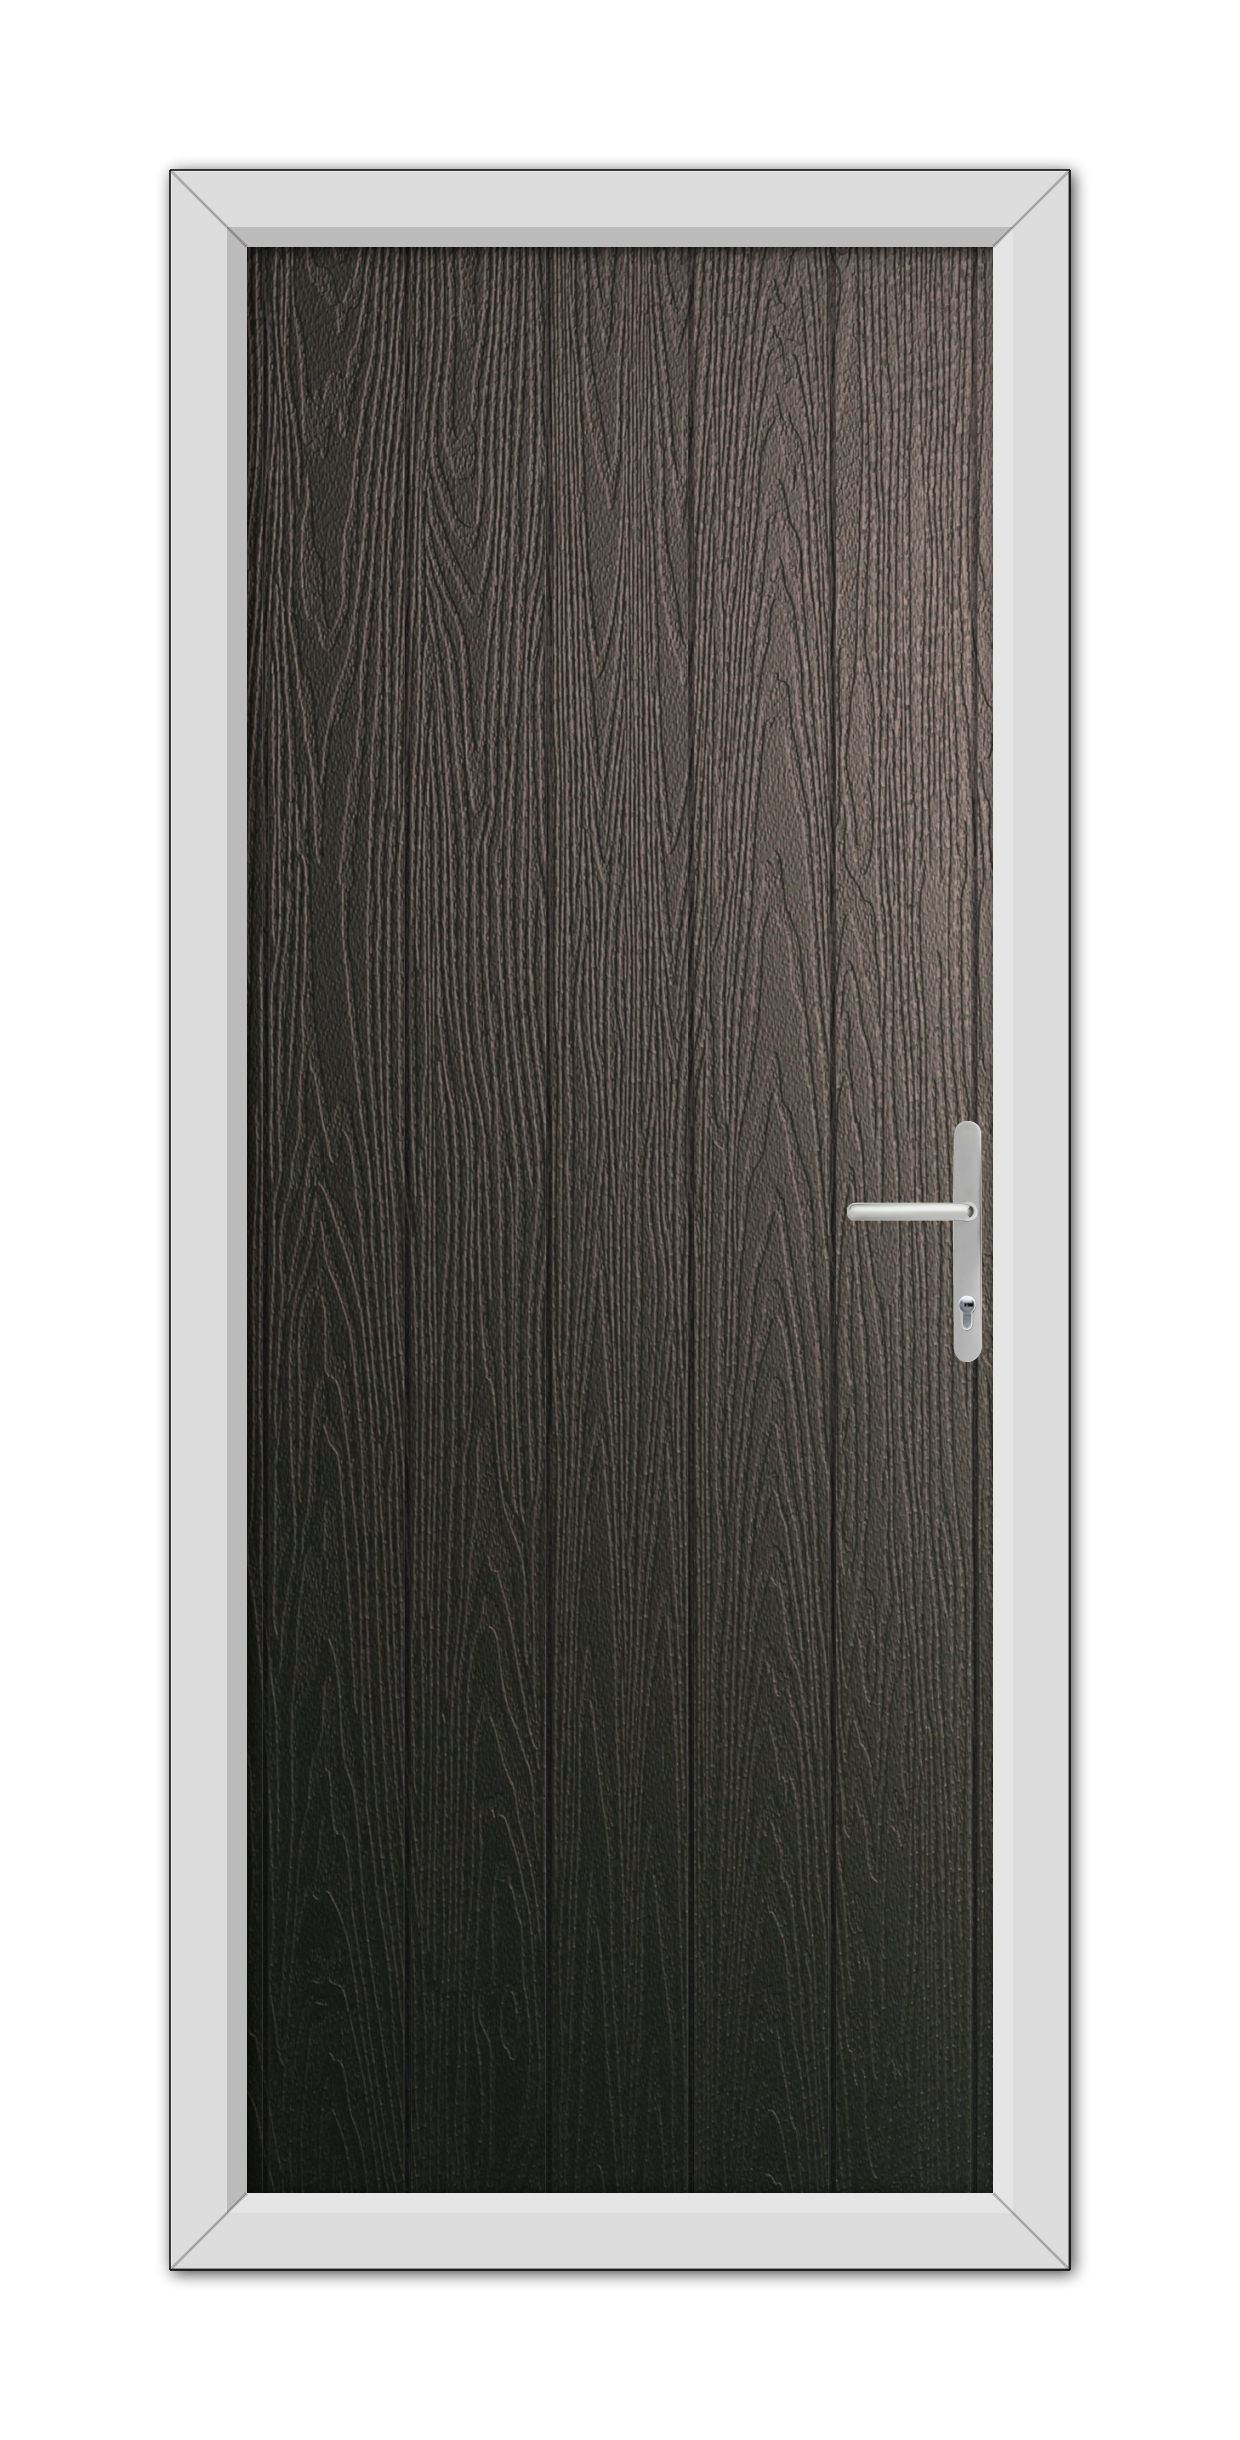 A modern Schwarzbraun Gloucester Composite Door 48mm Timber Core with a silver handle, set within a white door frame, isolated on a white background.